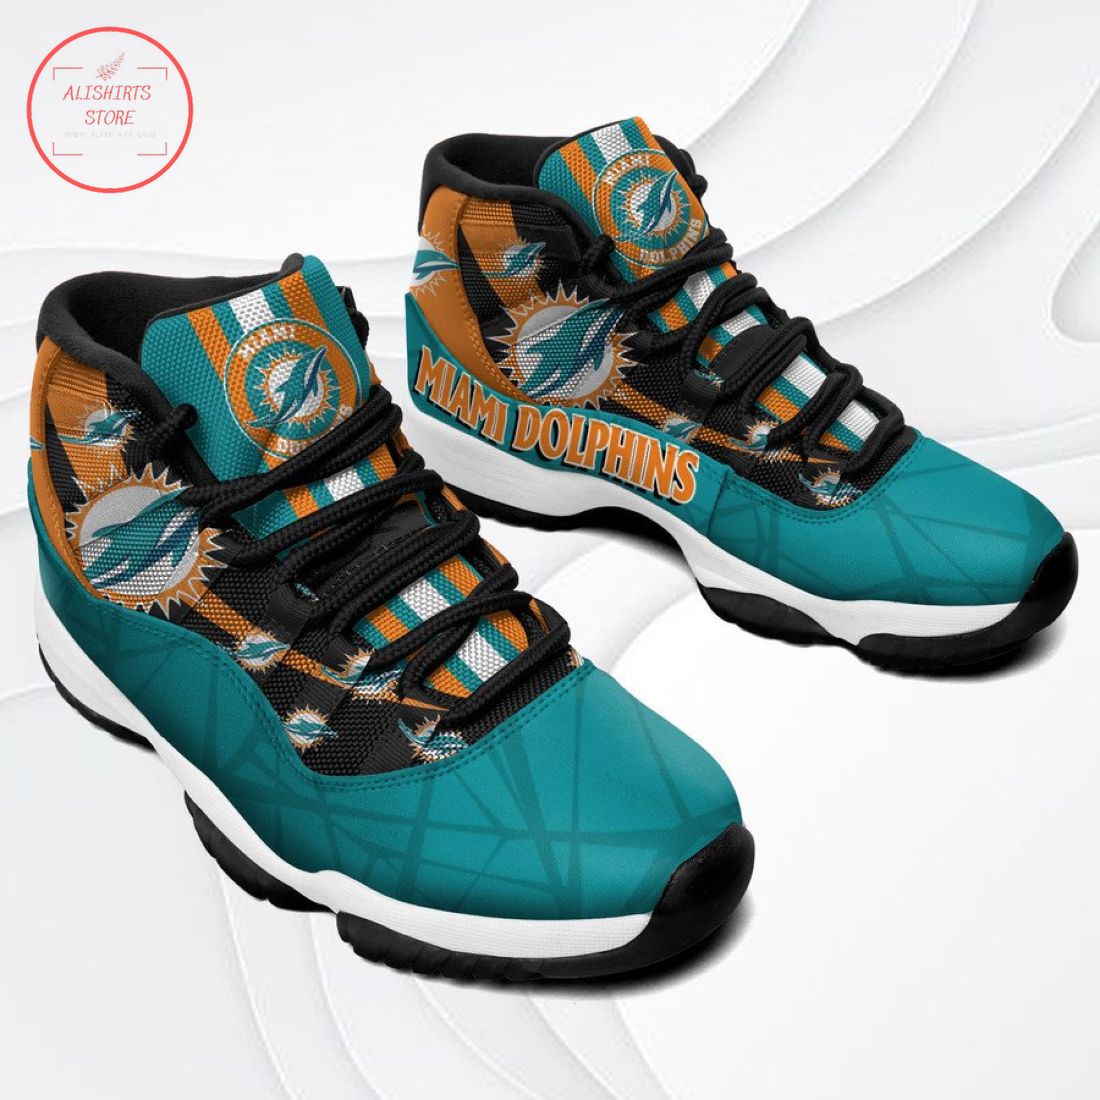 NFL Miami Dolphins New Air Jordan 11 Sneakers Shoes